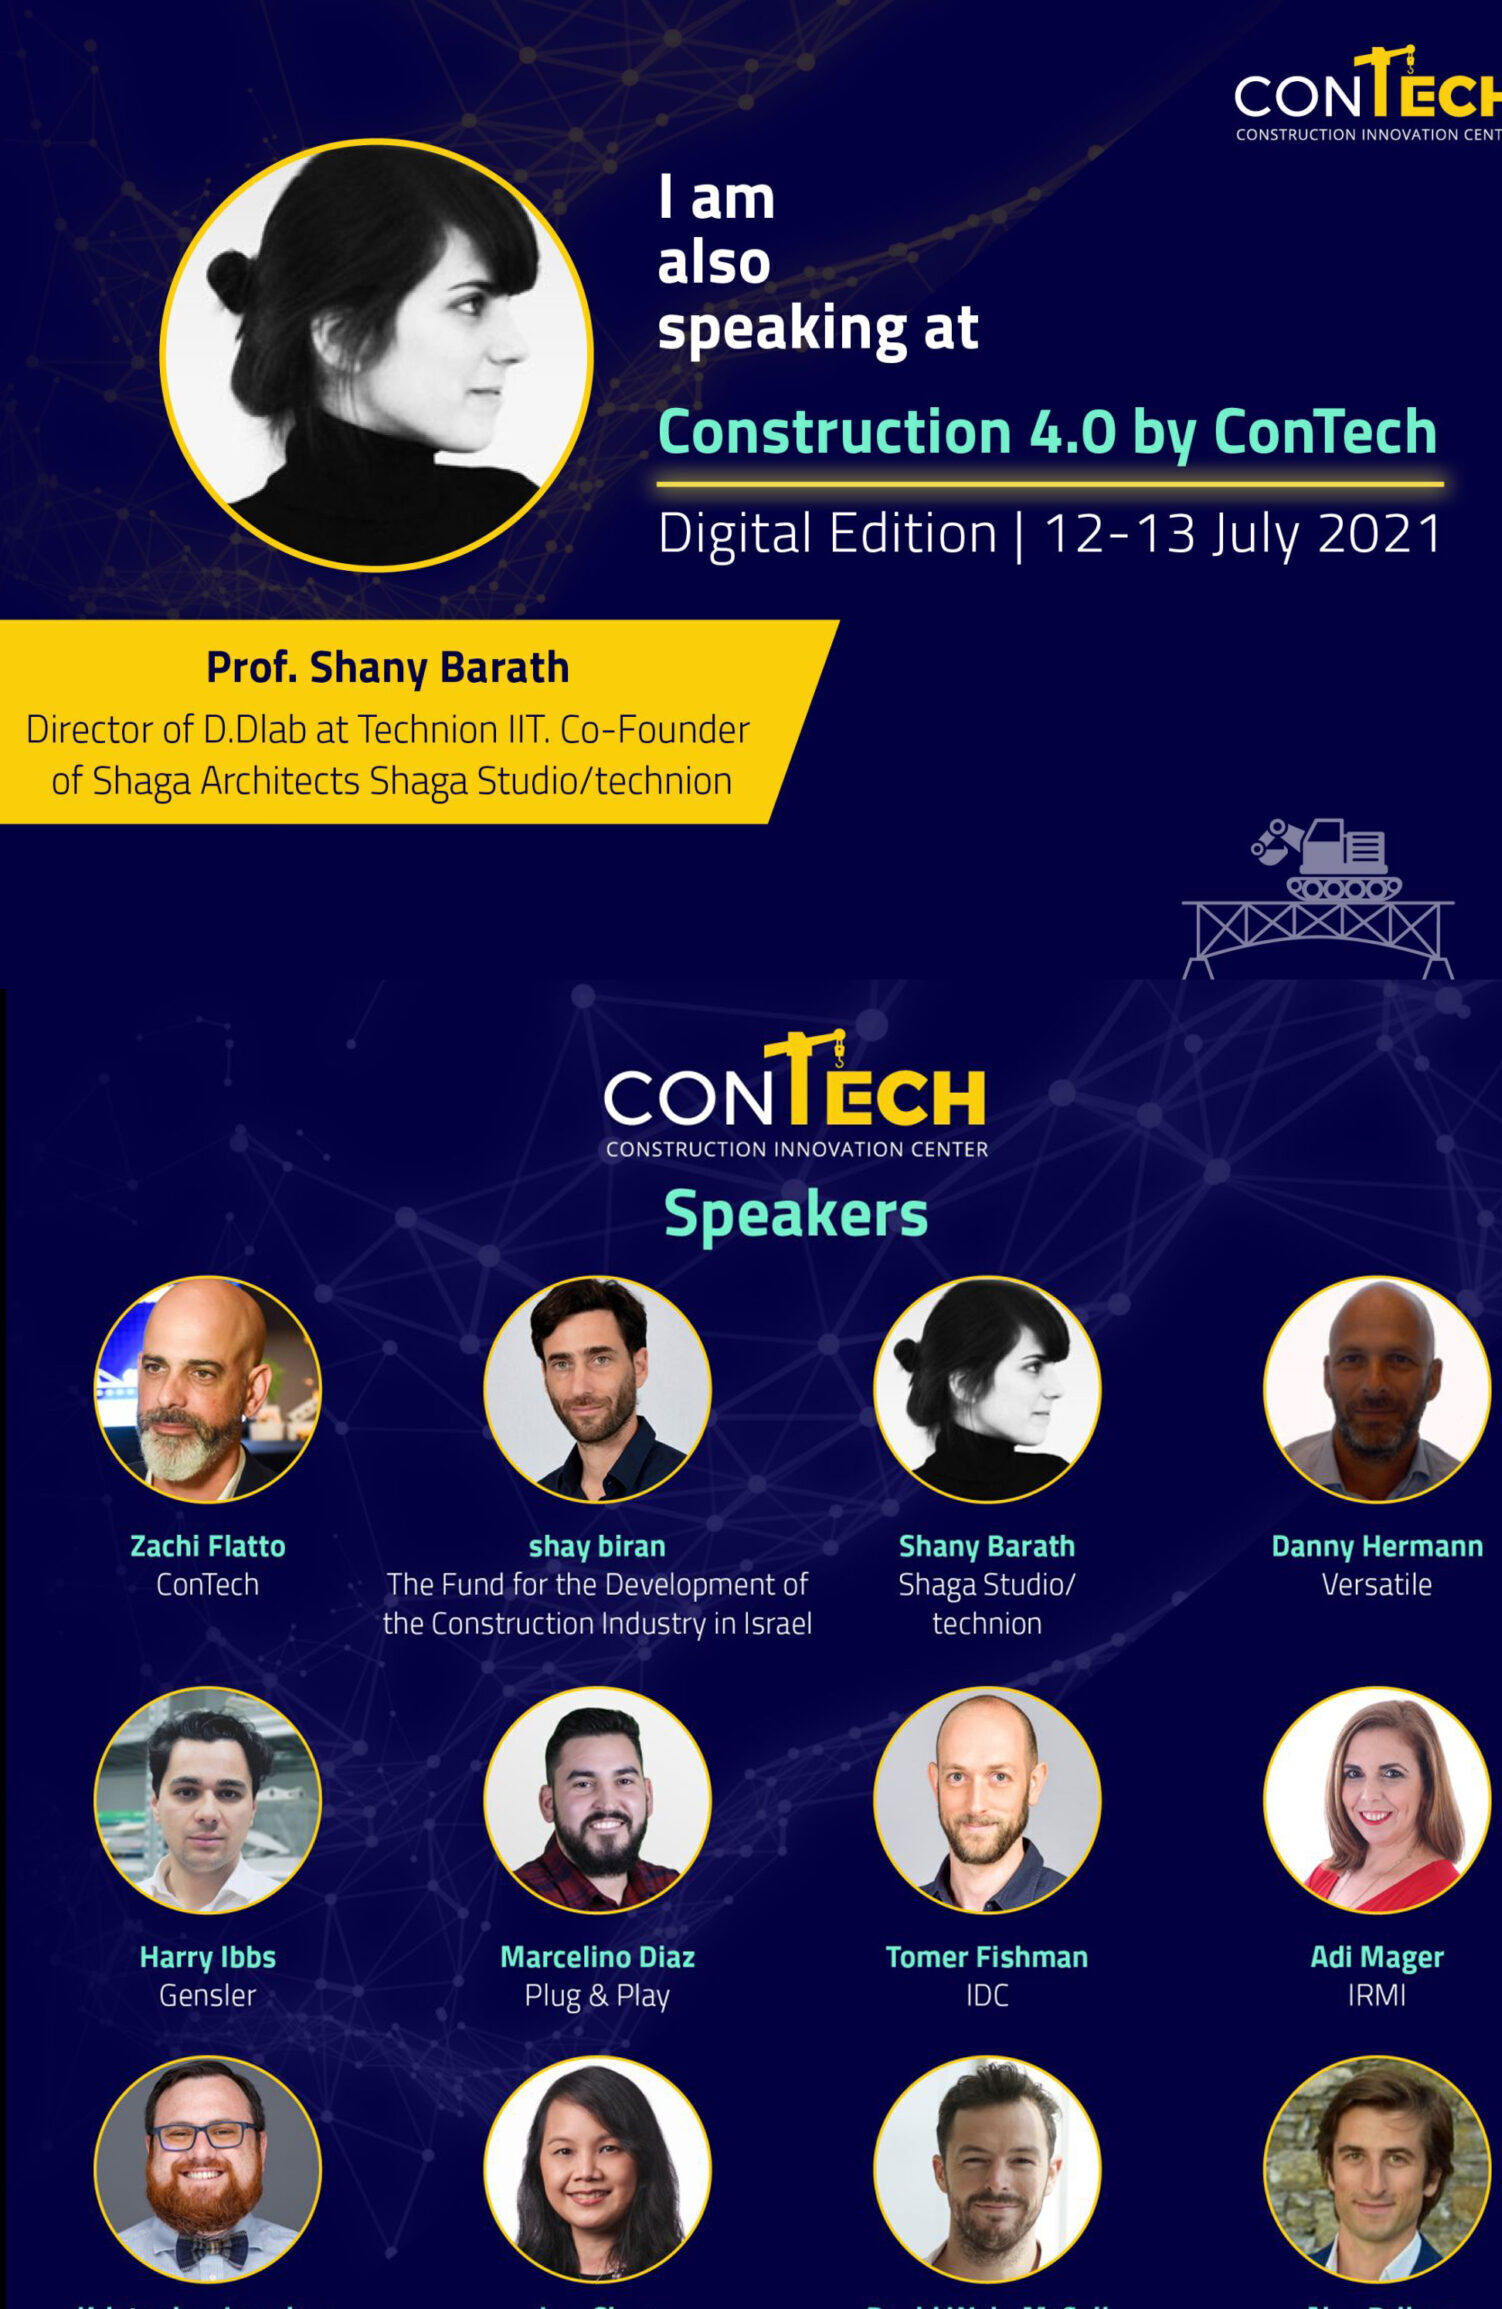 Conference: ConTech 2021